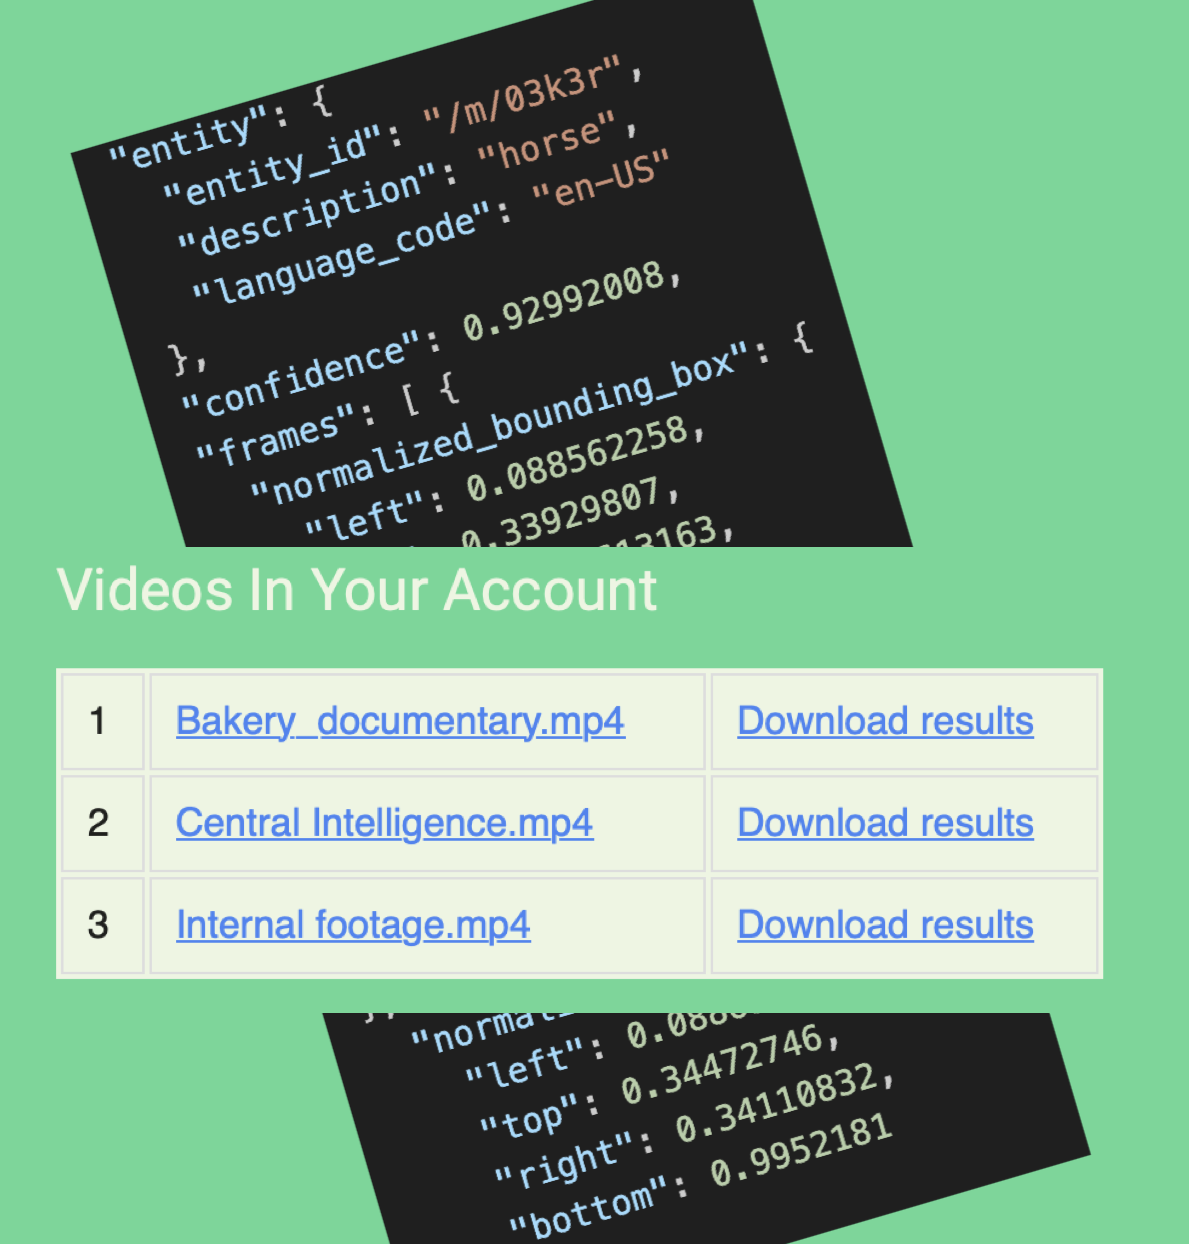 Download results in json and view uploaded videos